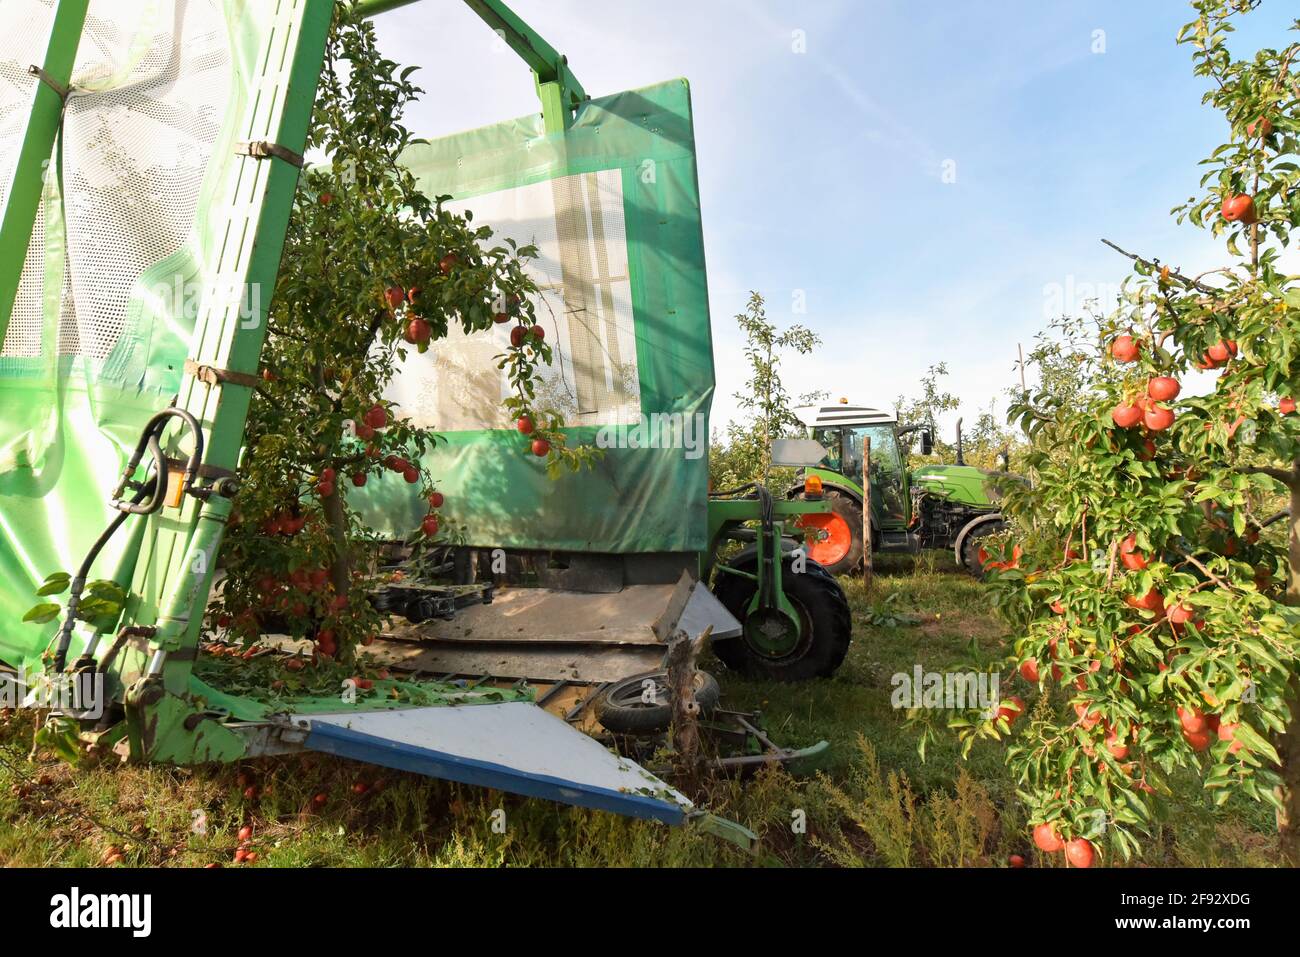 modern apple harvest with a harvesting machine on a plantation with fruit trees Stock Photo